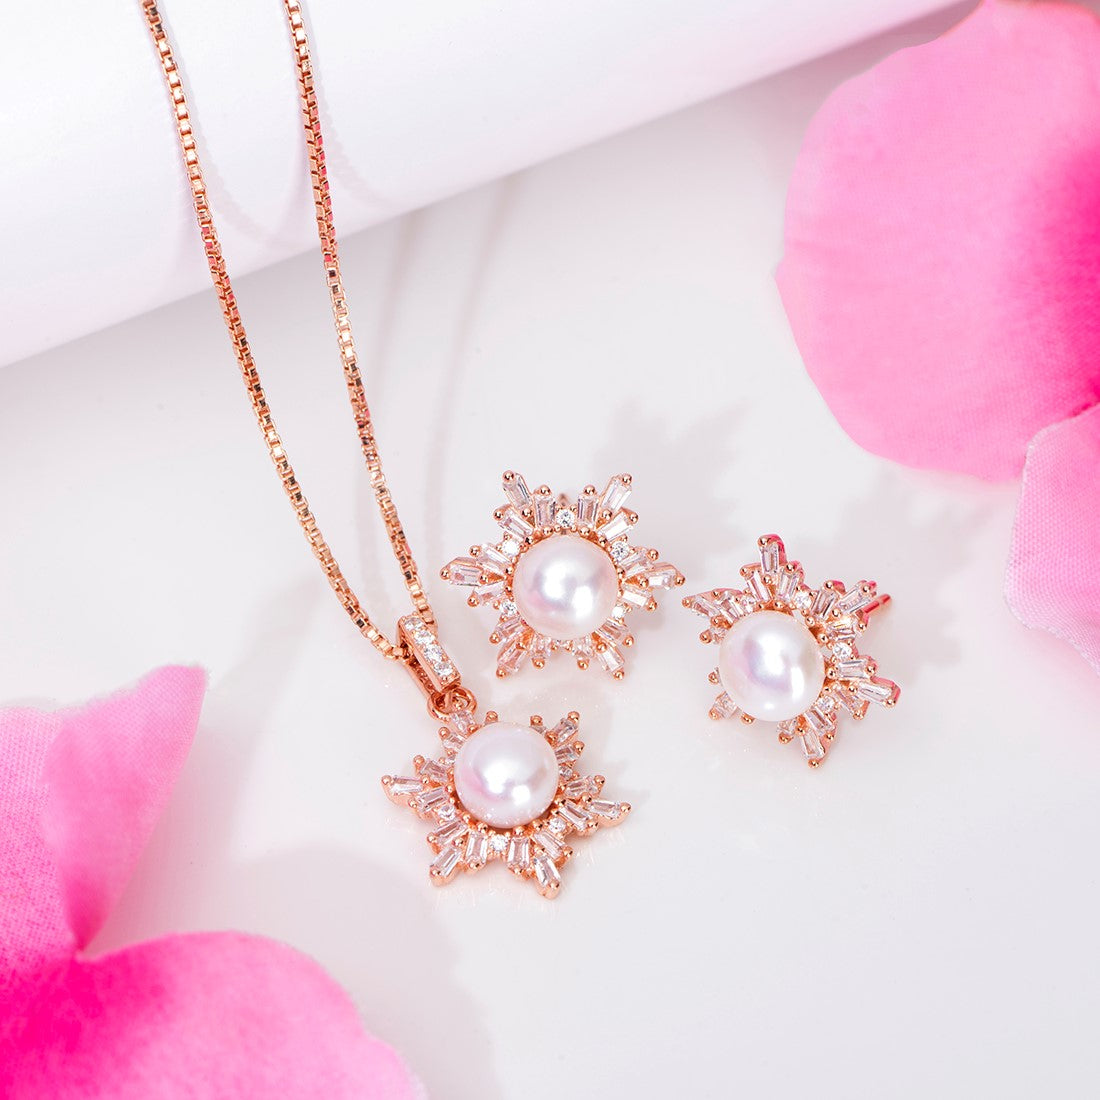 Snowflake Elegance Rose gold Plated 925 Sterling Silver Jewelry Set